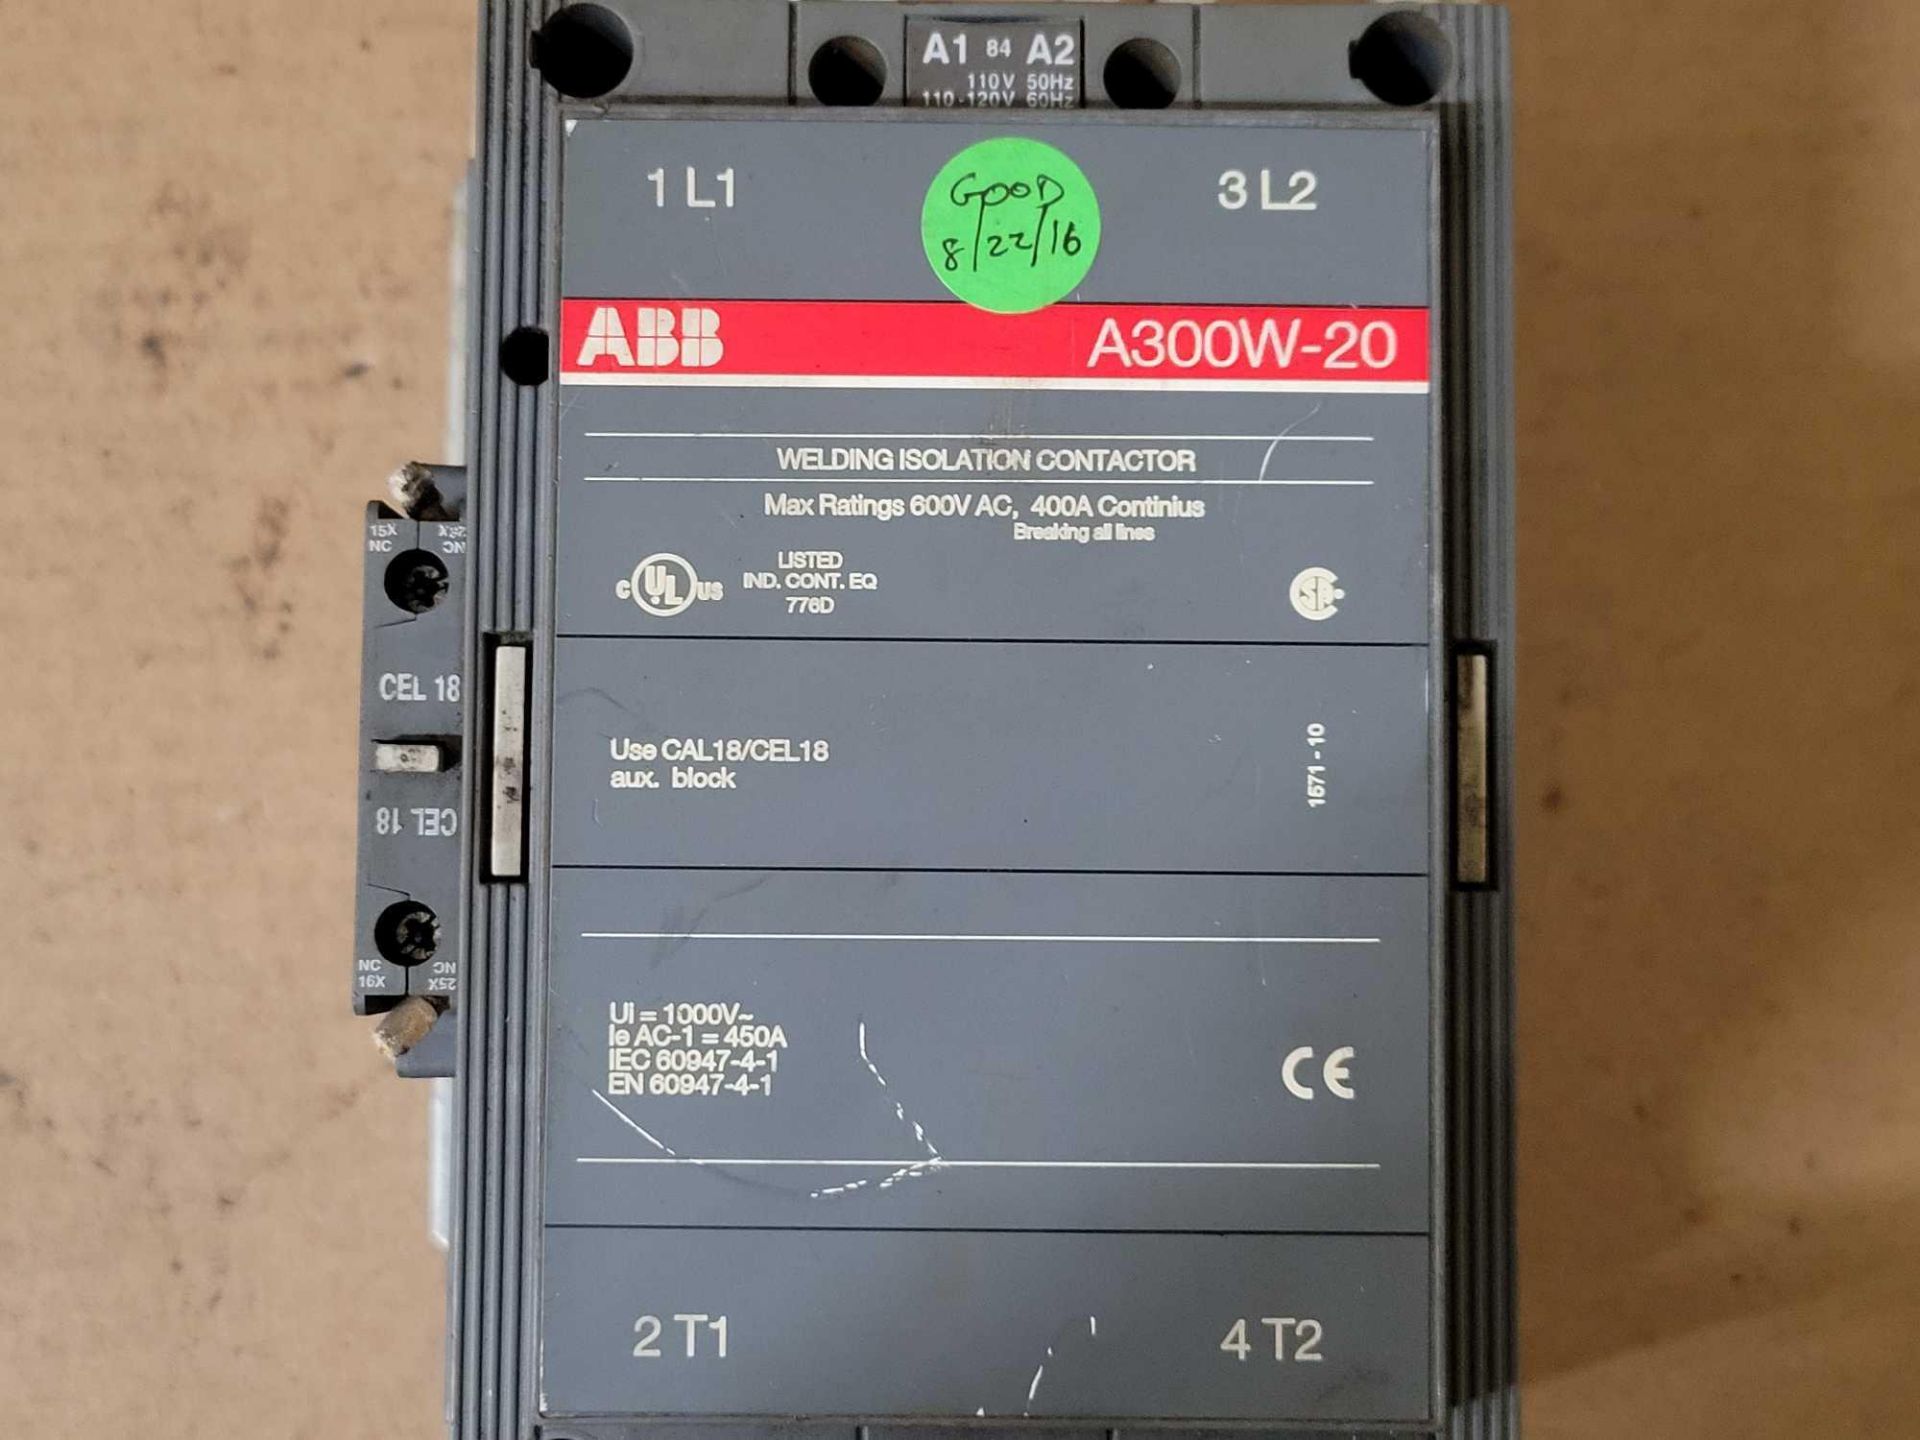 LOT OF 2 ABB A300W-20 WELDING ISOLATION CONTACTOR - Image 3 of 5